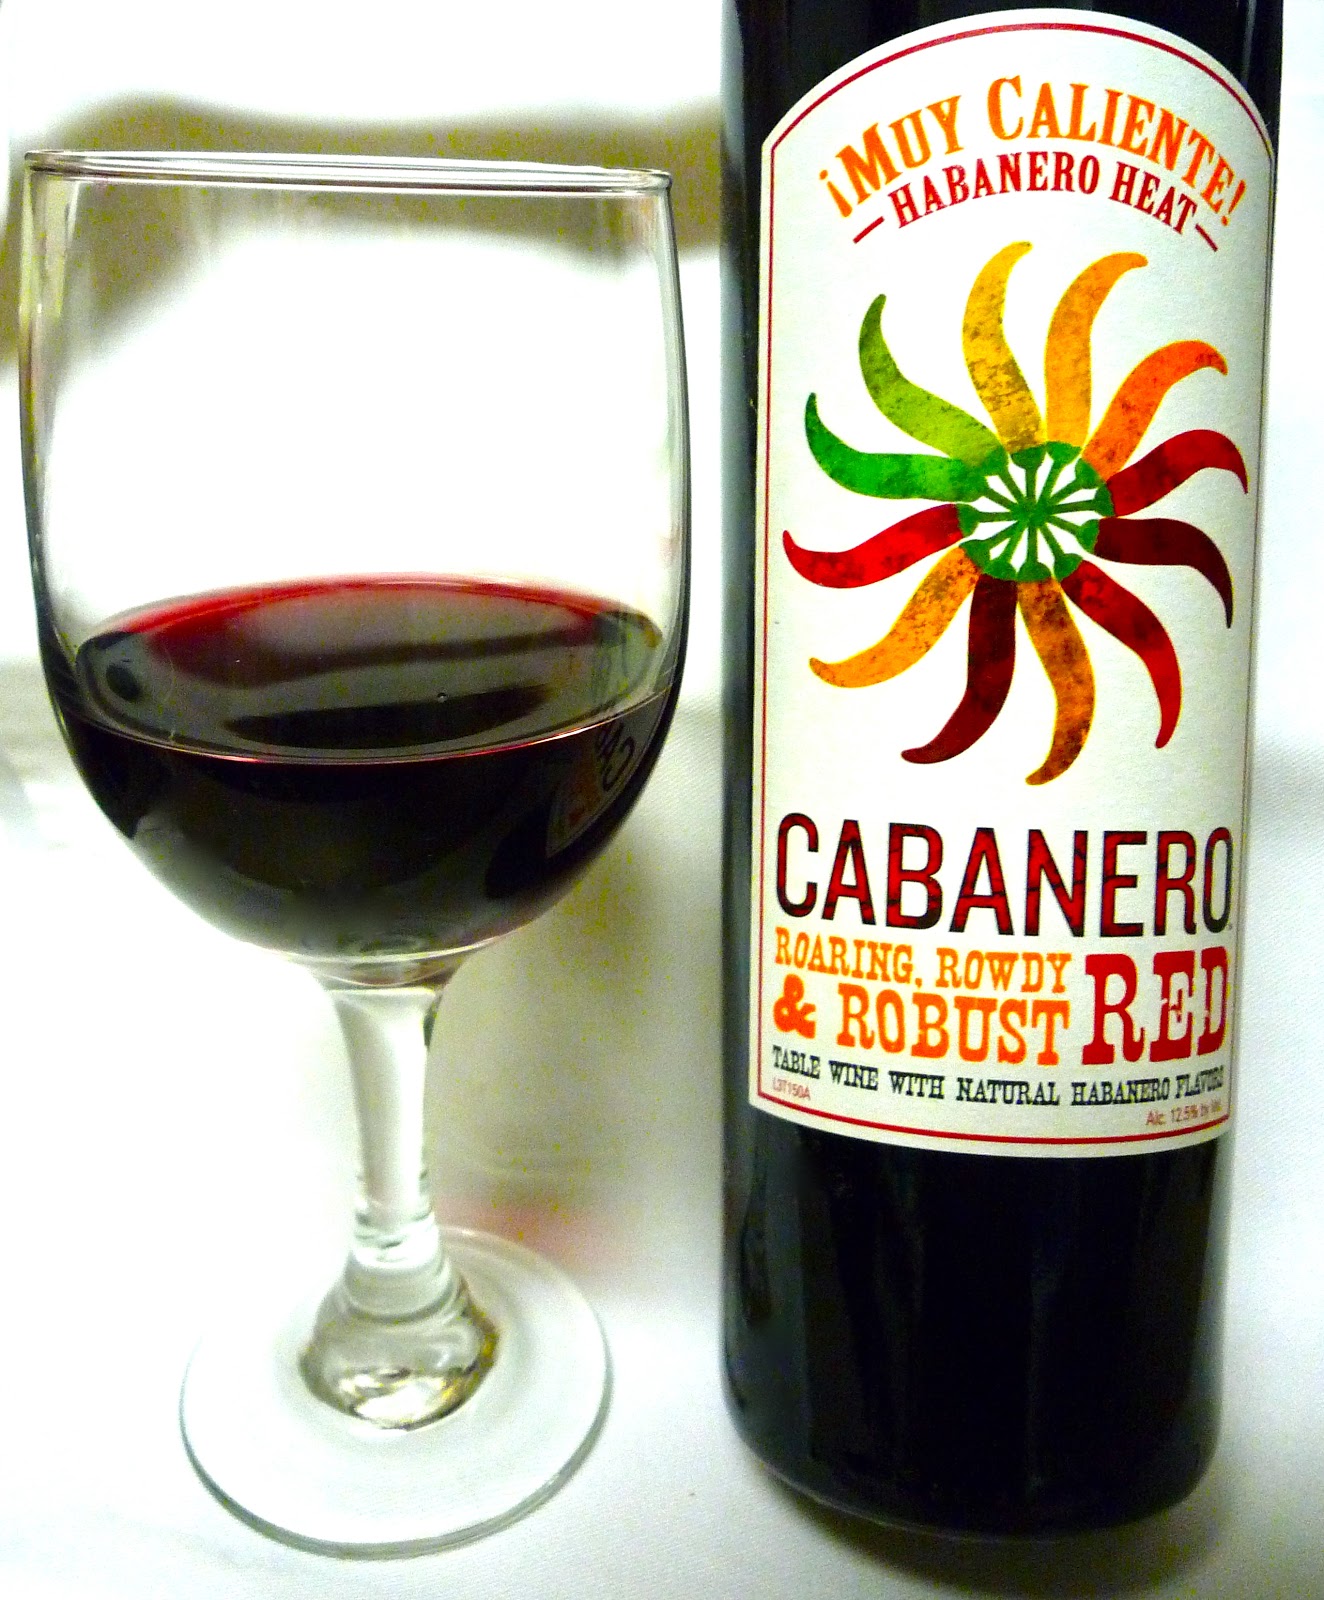 heldig Blive Ups The Weekend Gourmet: Kicking Off Spicy Foods Week...With Cabanero  Habanero-Infused Wine and Carne Asada with Mexican Grill Rub